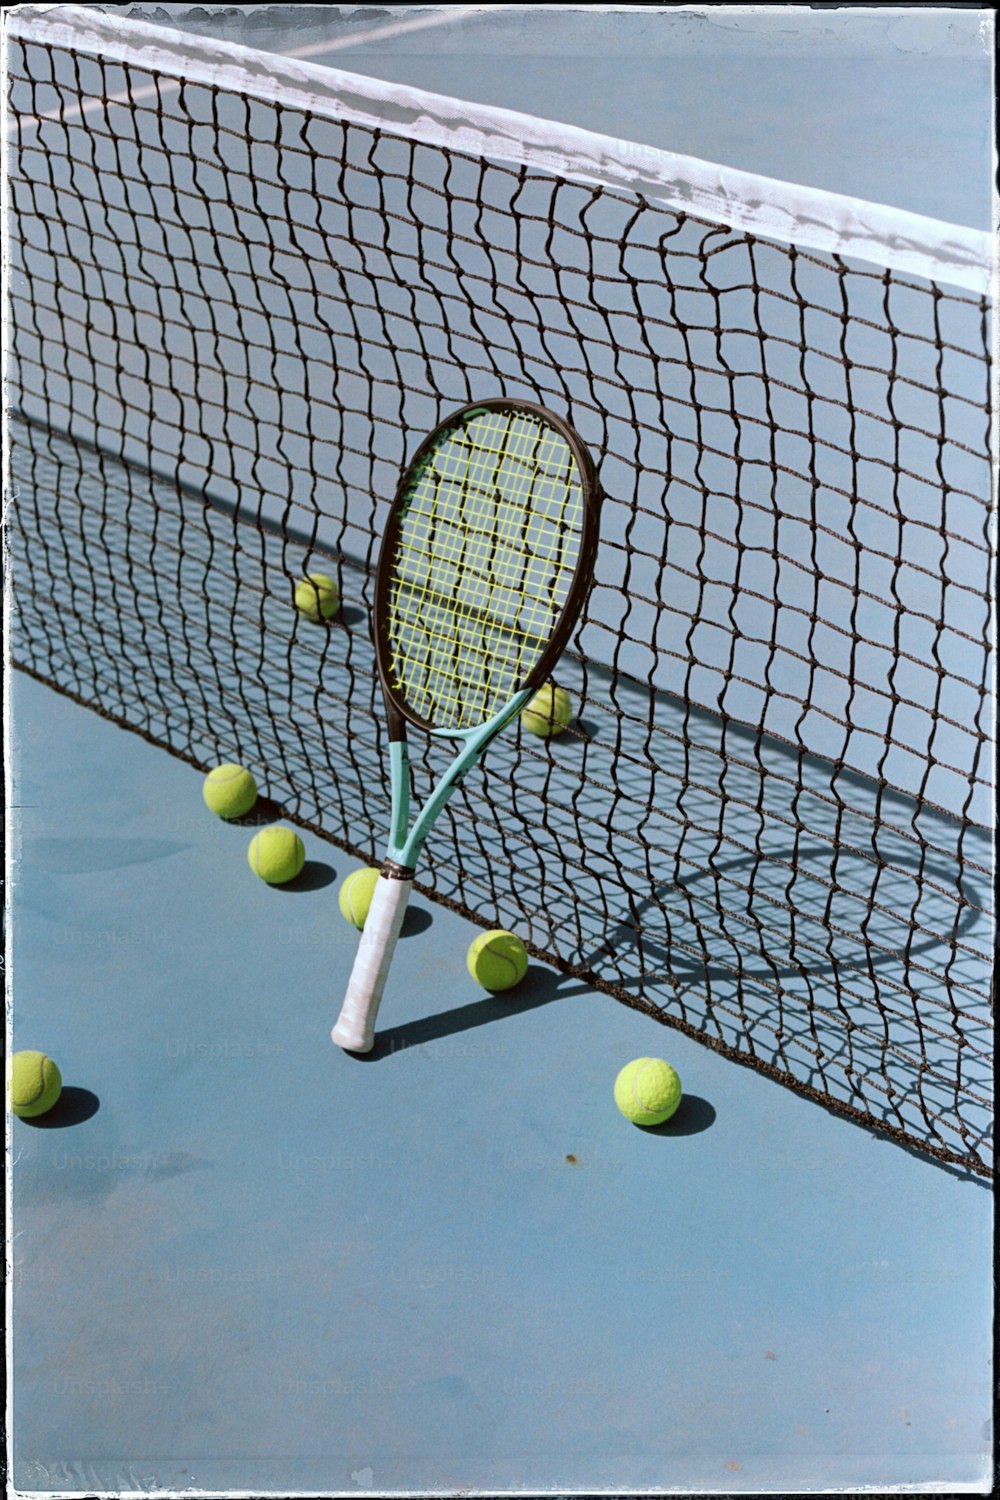 a tennis racket sticking out of the net